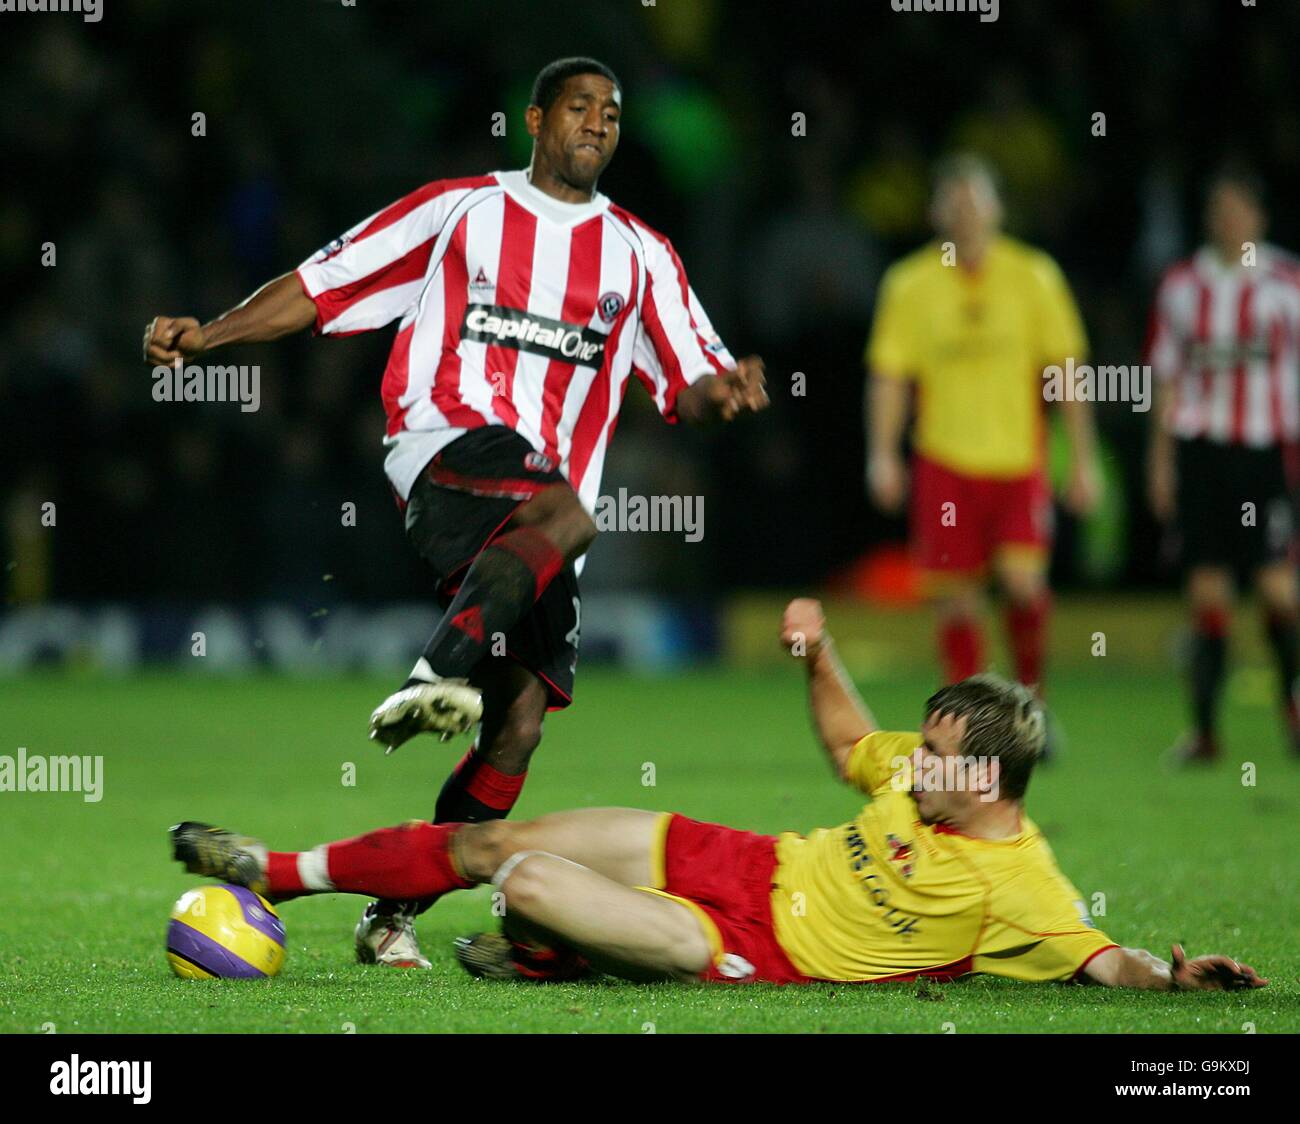 Soccer - FA Barclays Premiership - Watford v Sheffield United - Vicarage Road. Sheffield United's Mikele Leigertwood (l) jumps an oncoming tackle from Watford's Jay DeMerit Stock Photo